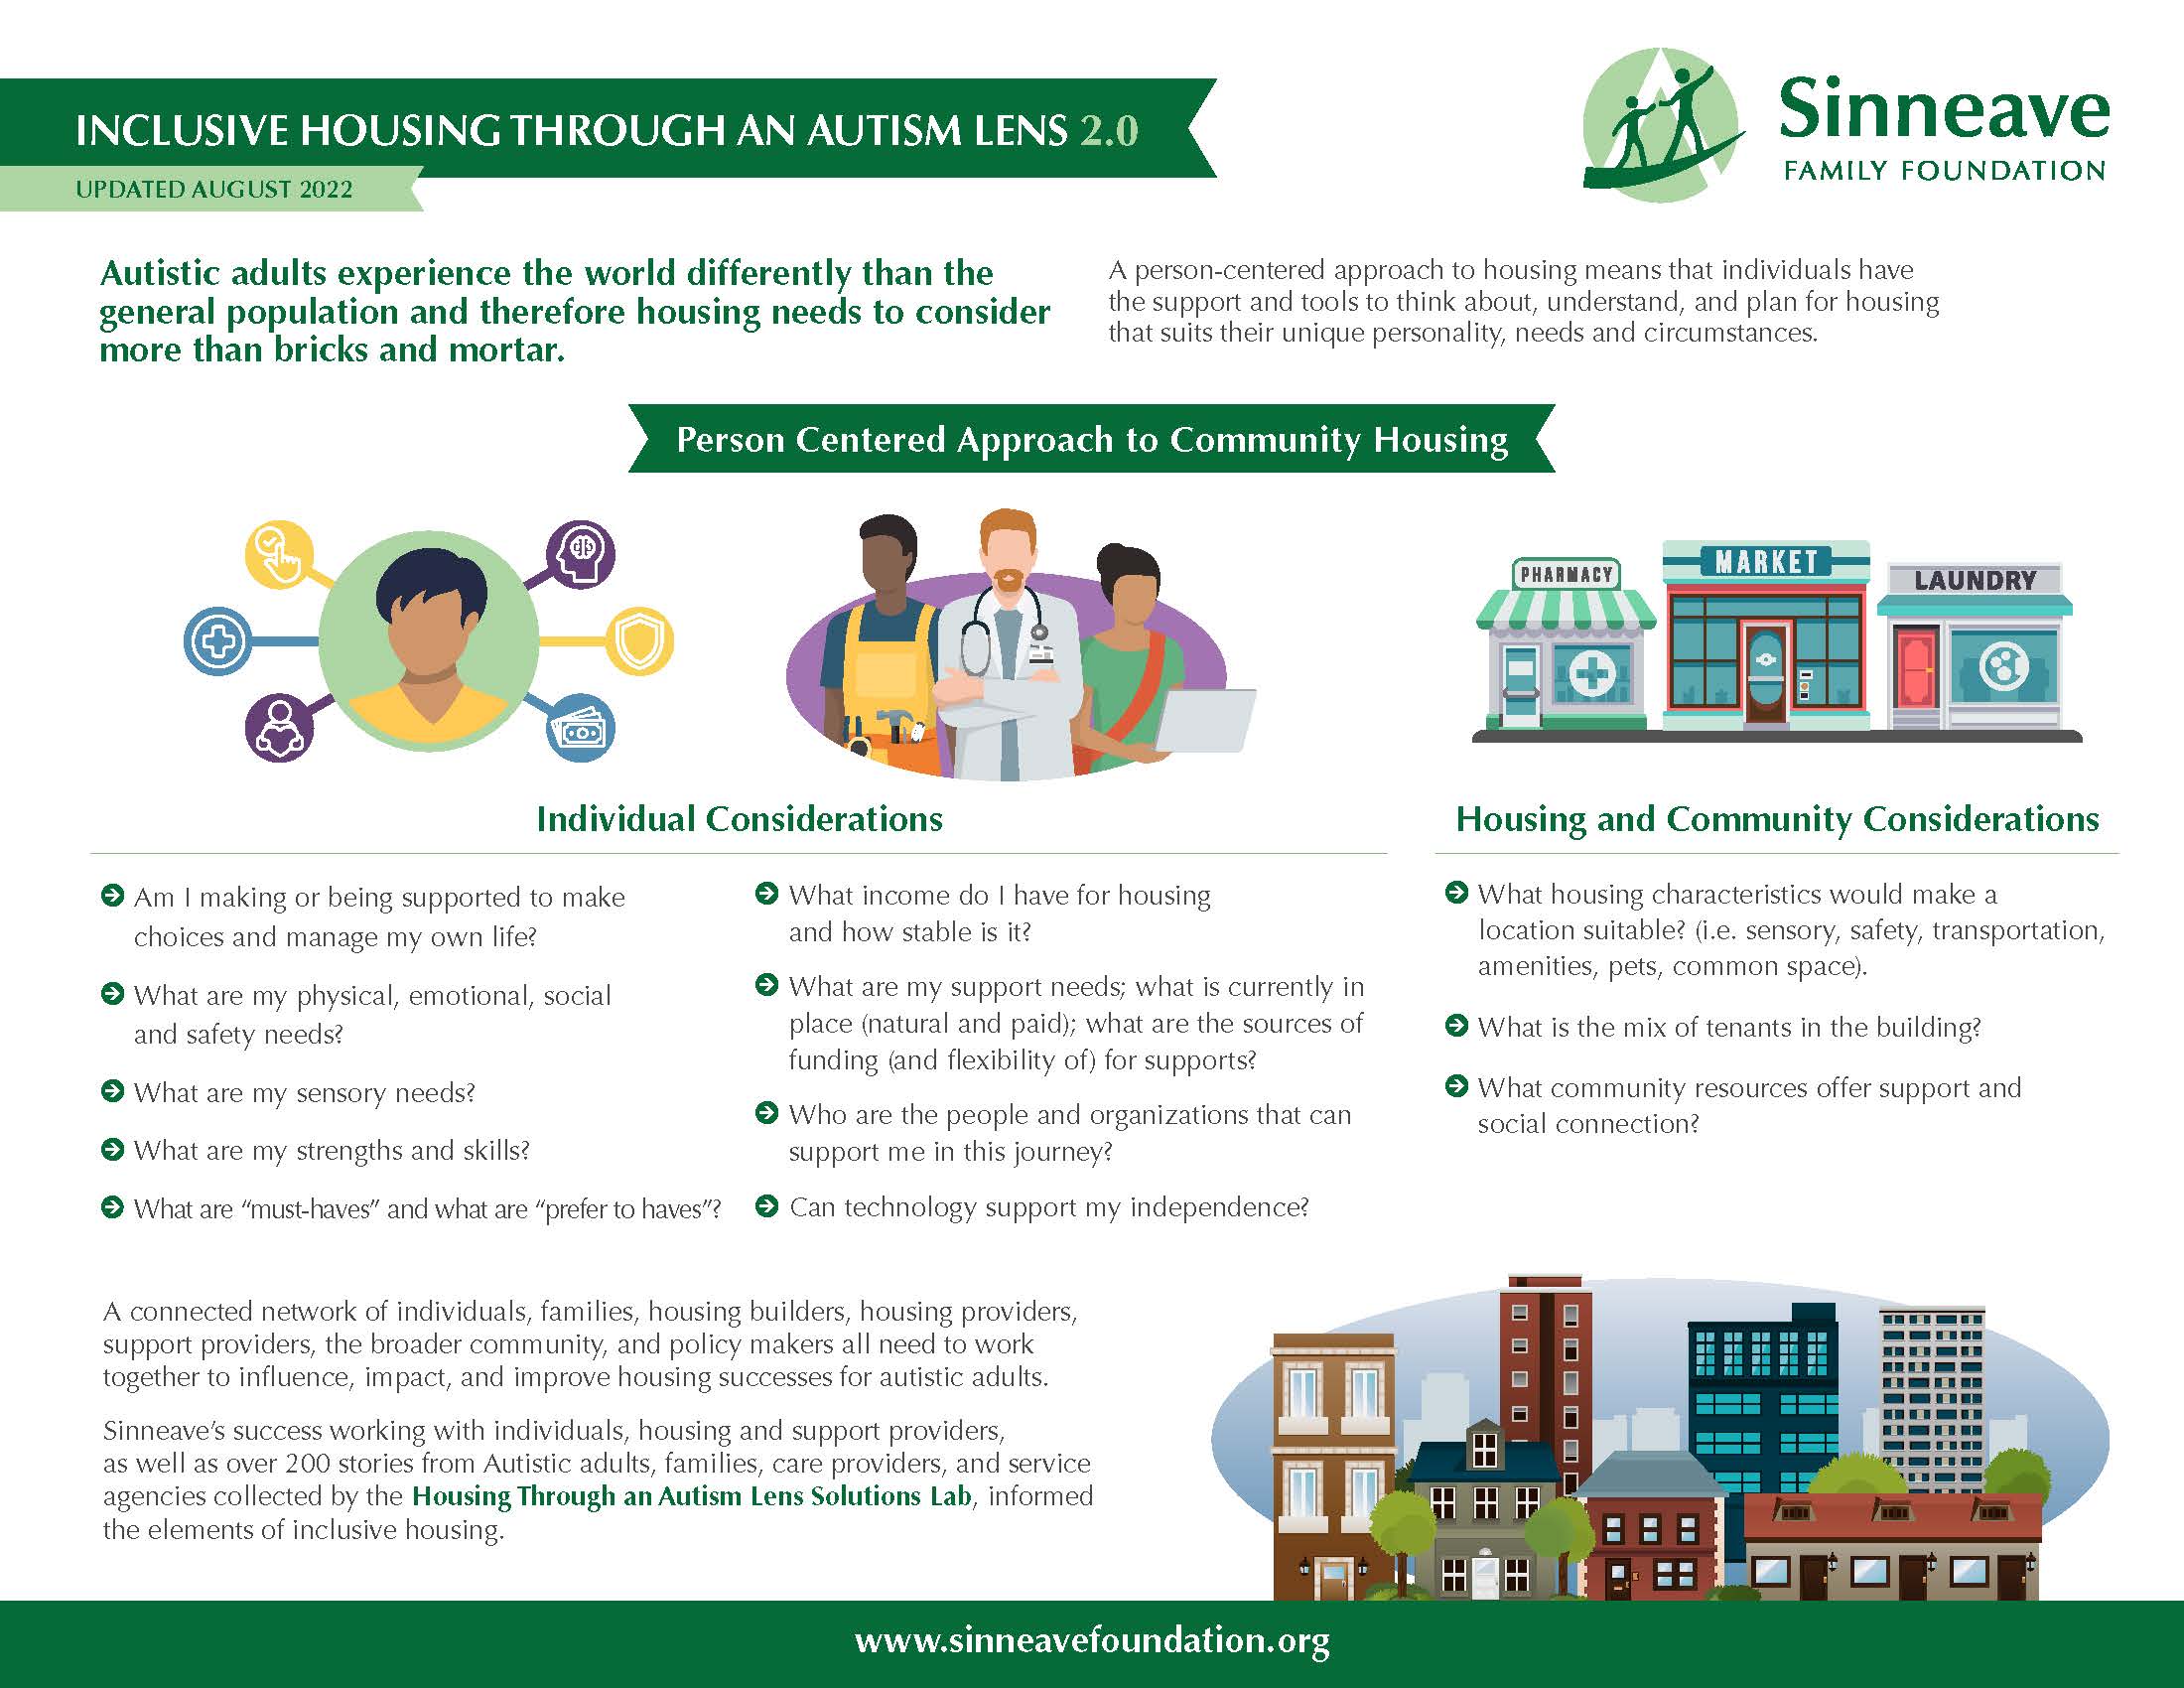 An image which you can click on to read or download, “Inclusive Housing Through an Autism Lens 2.0”.